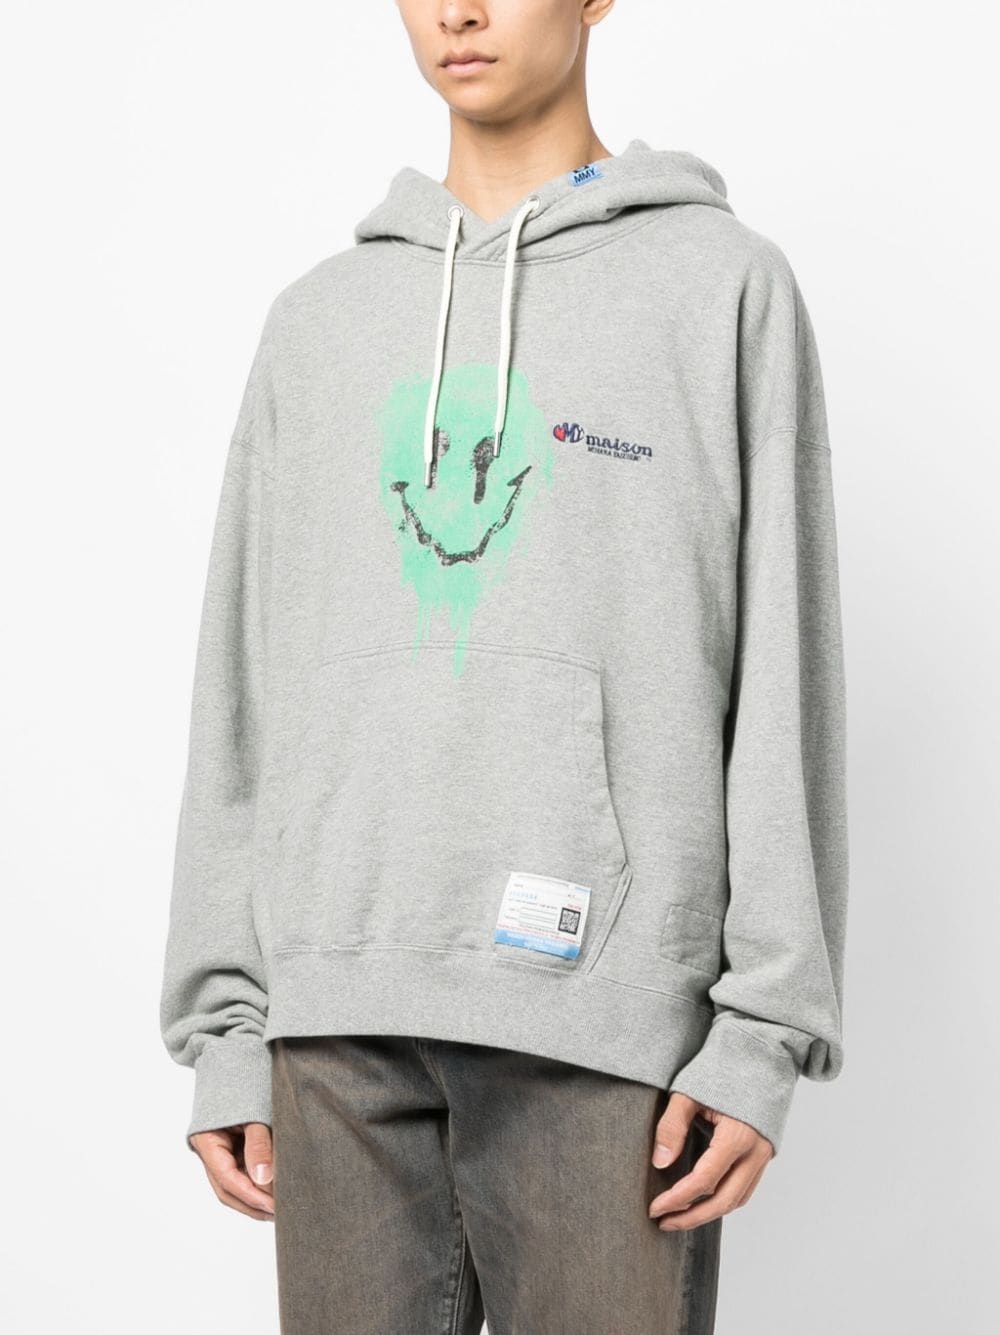 smiley-face print cotton hoodie - 3